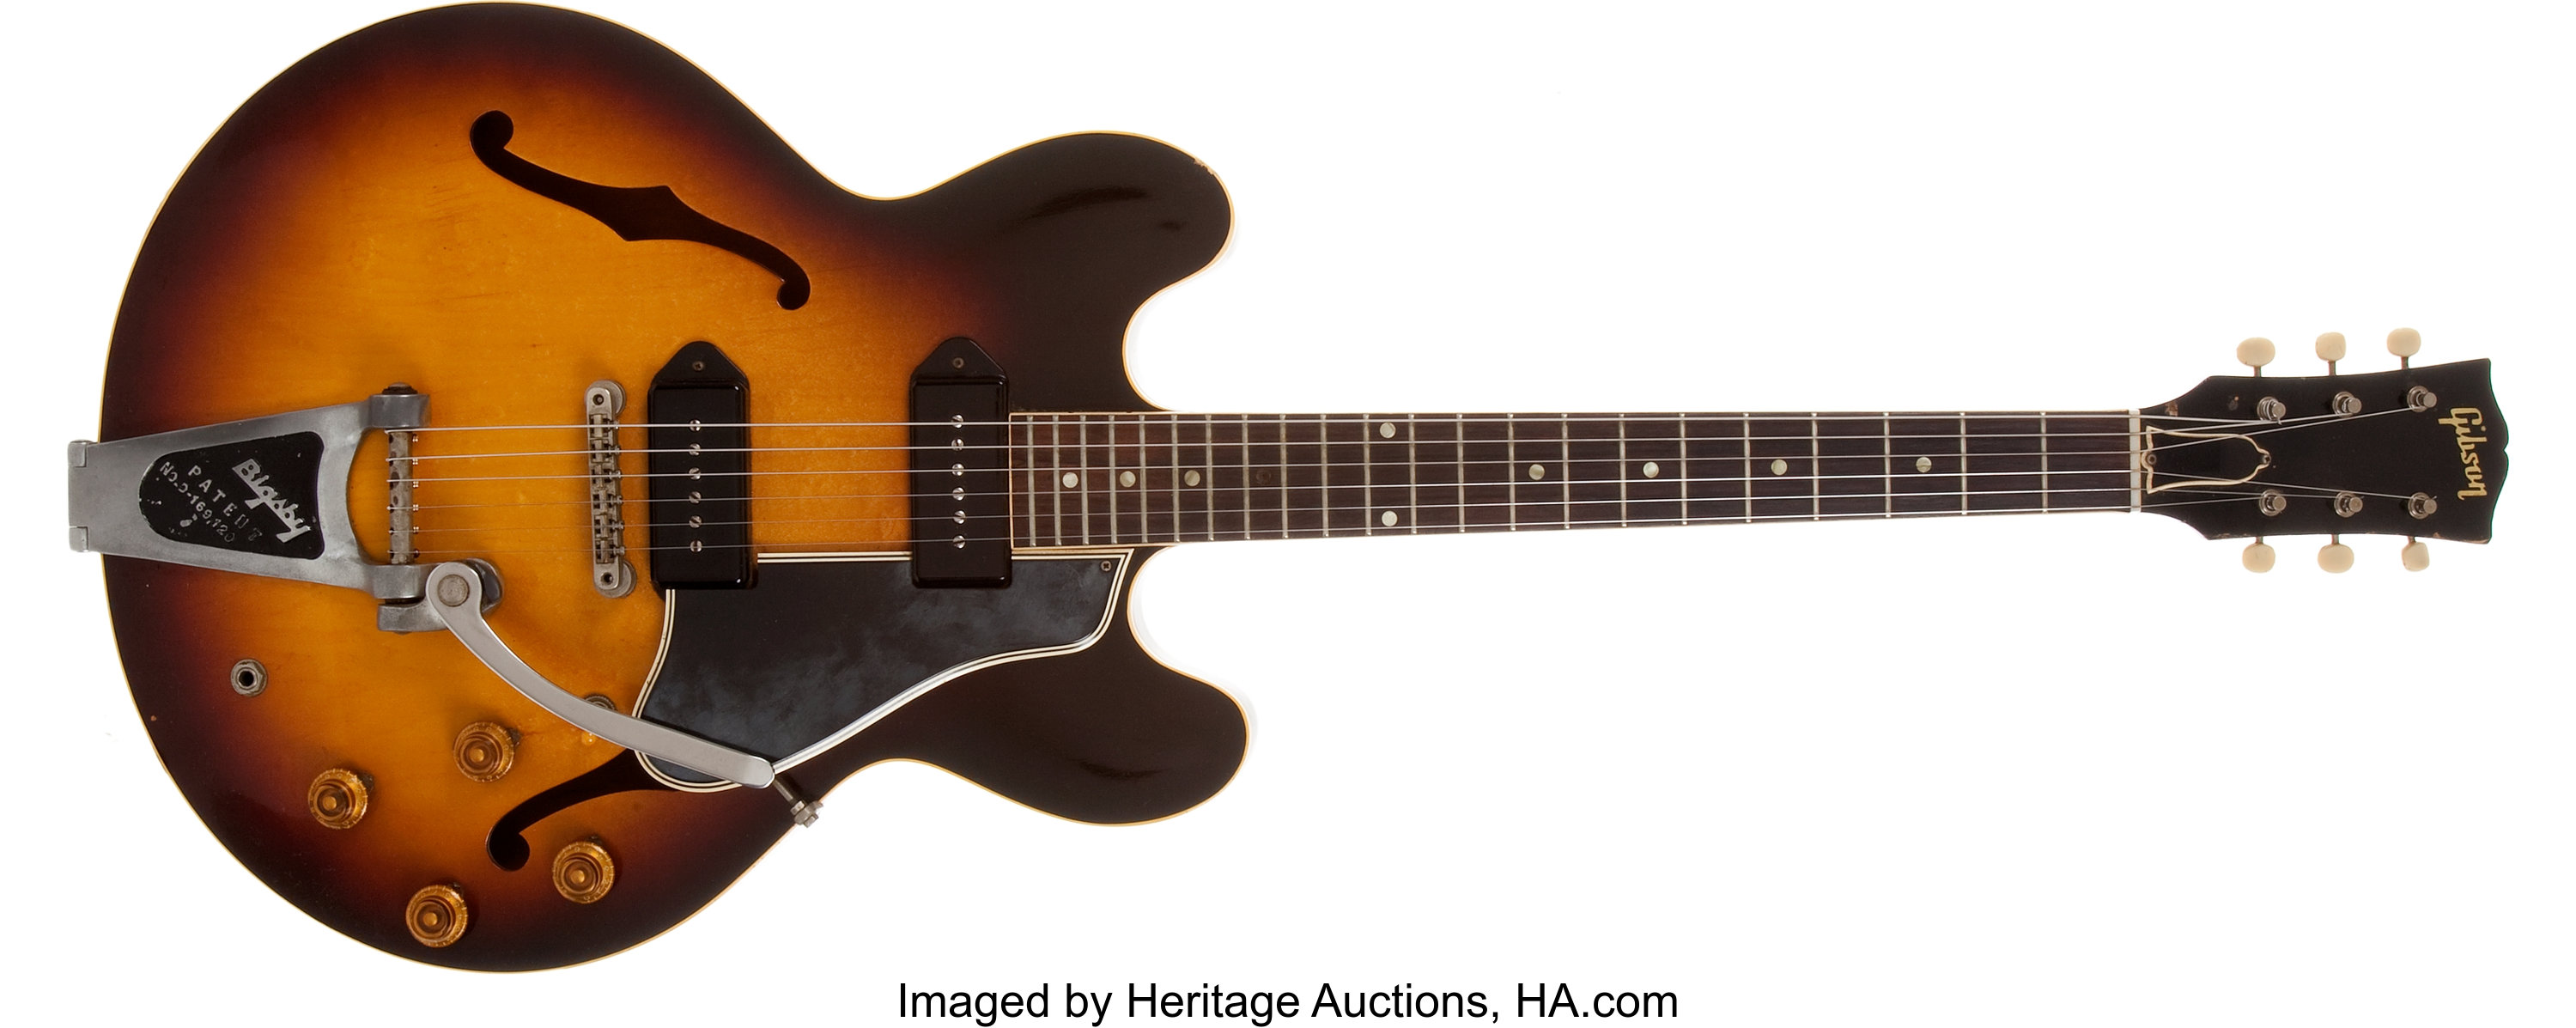 Heritage Auctions Search